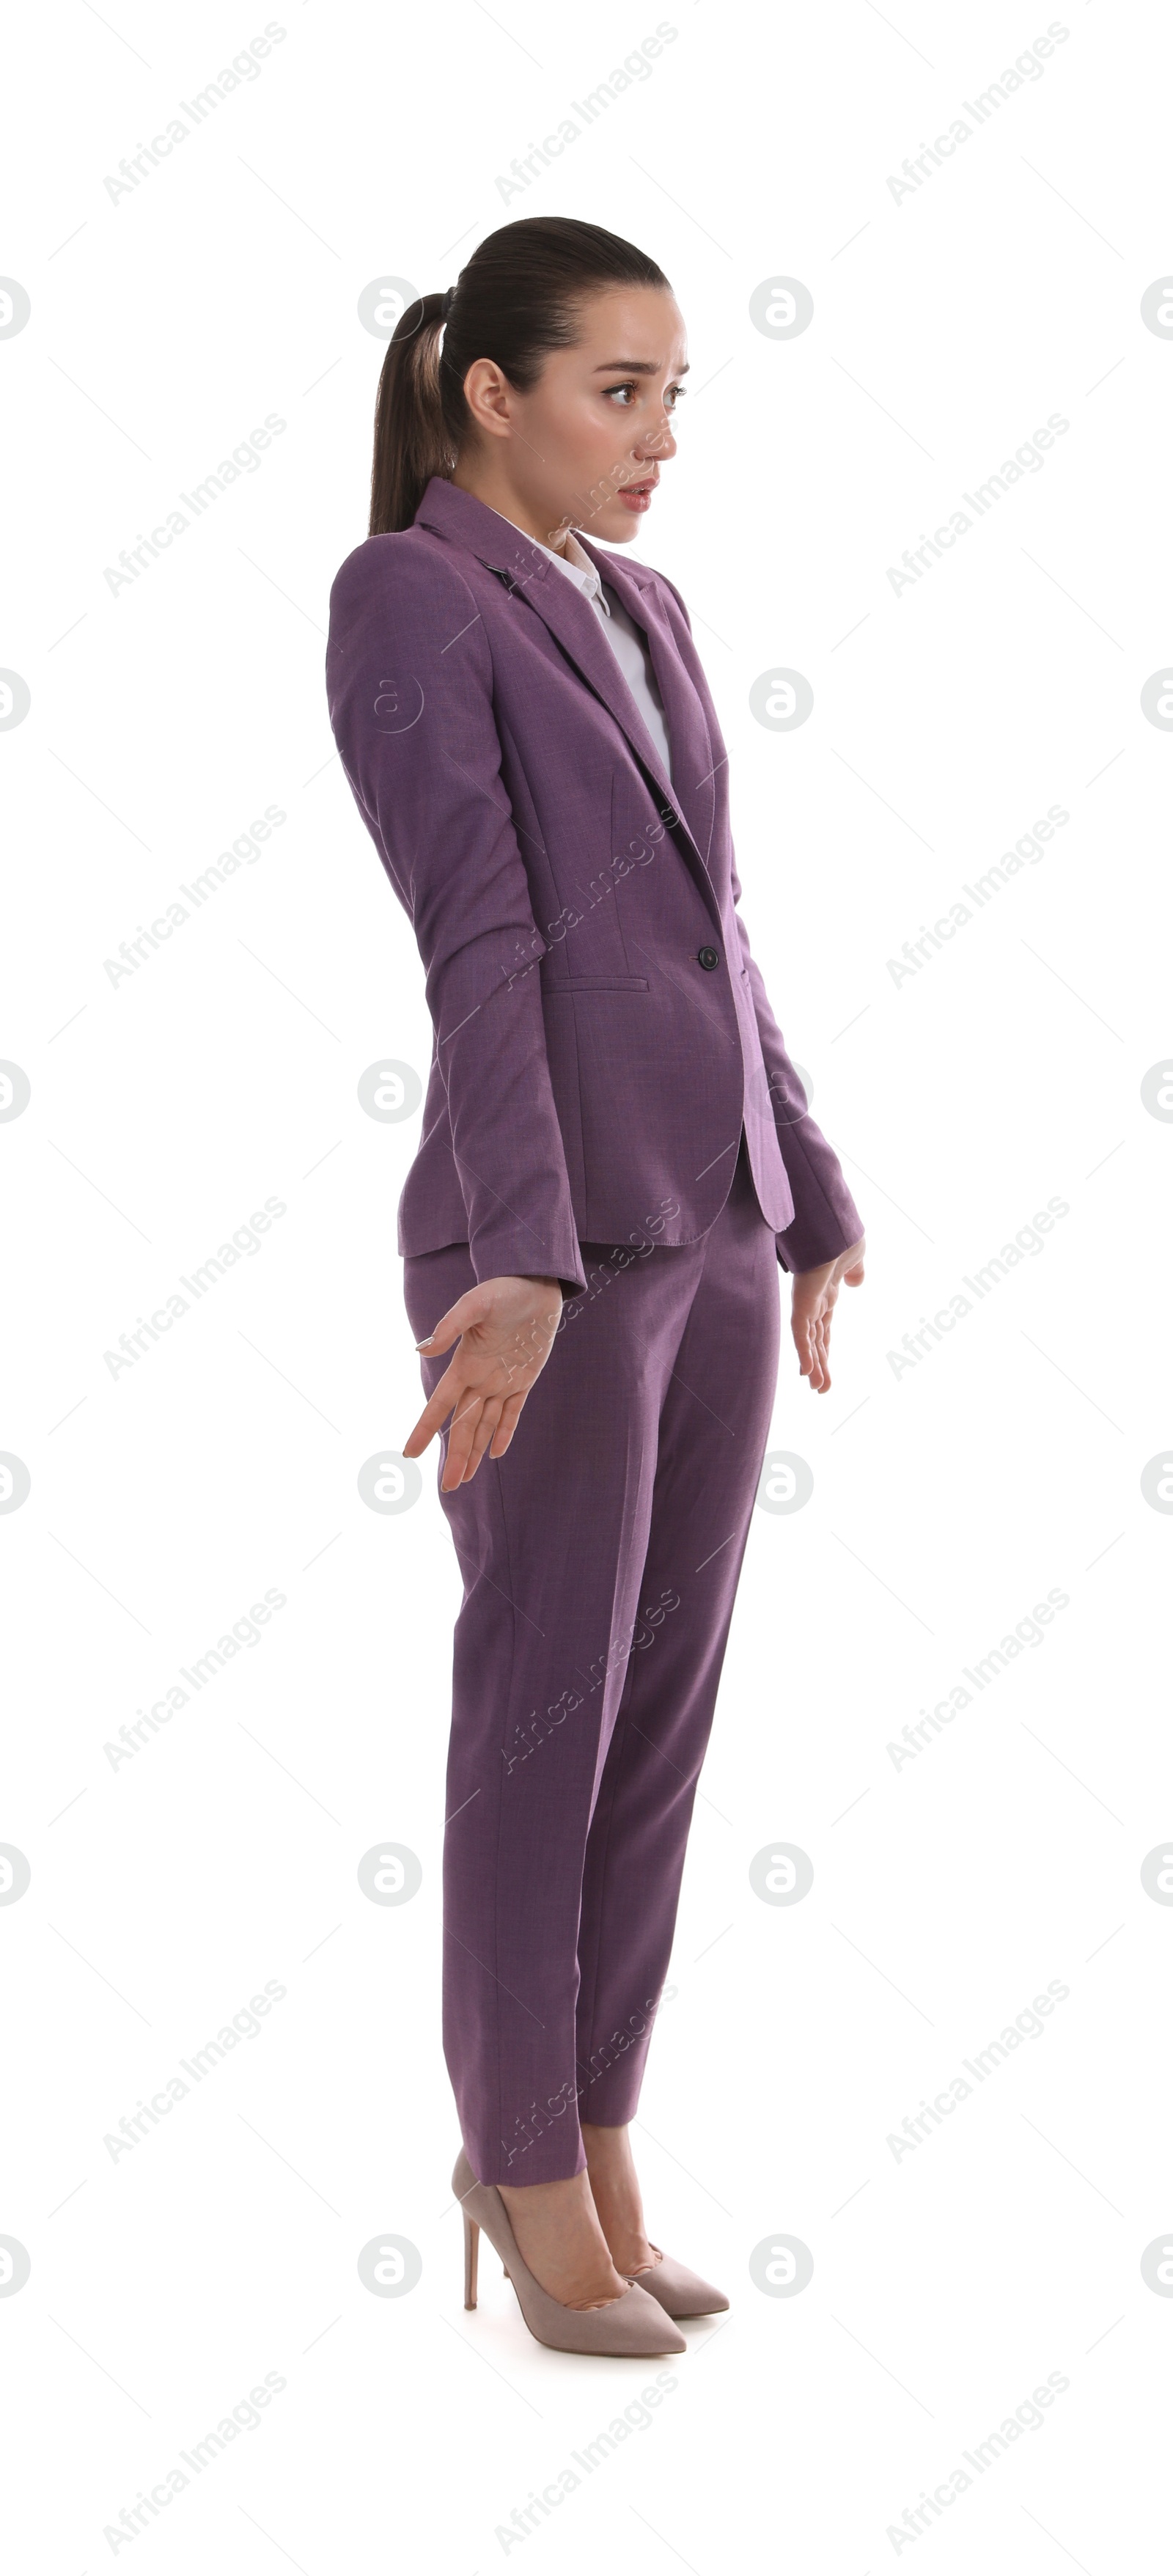 Photo of Emotional woman in suit on white background